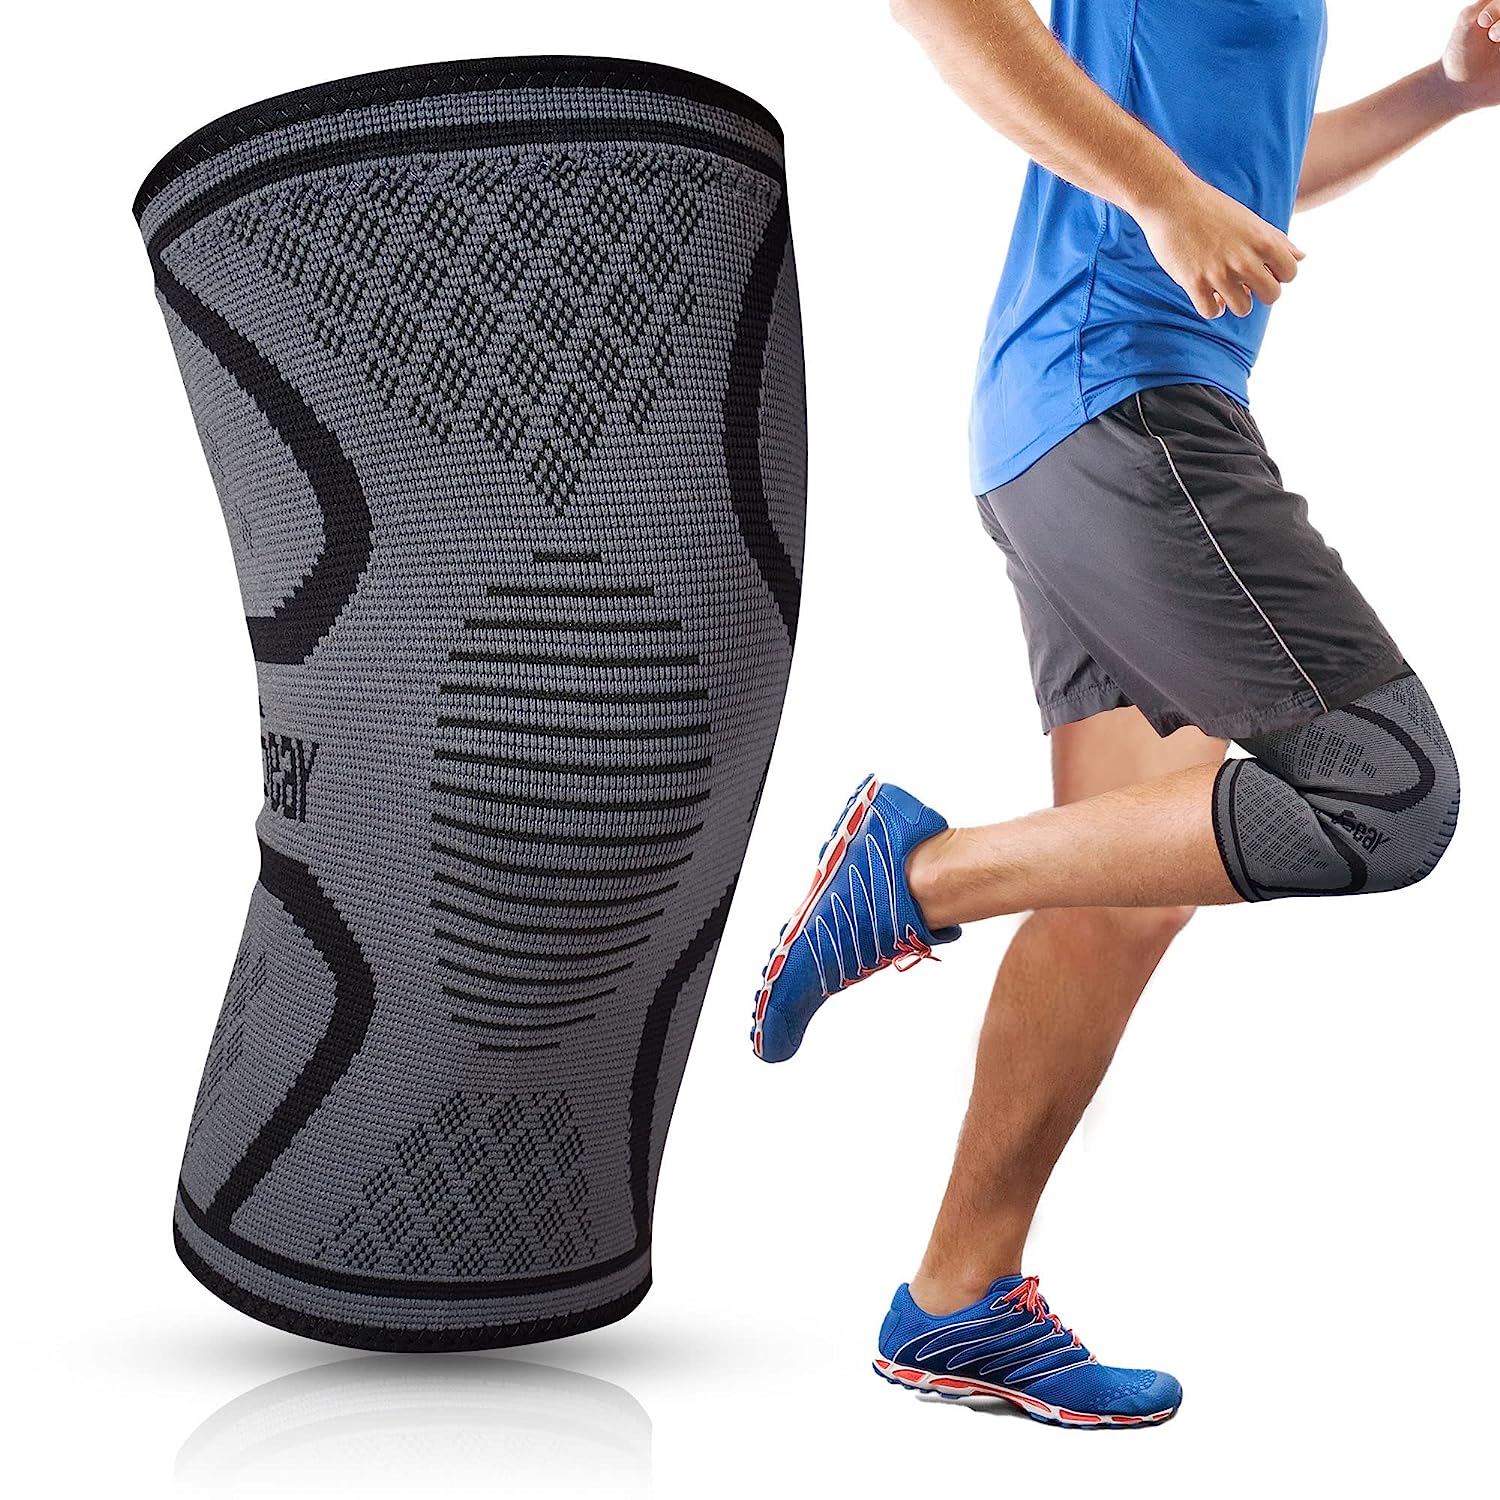 Knee Compression Sleeve - Reduce Strain & Swelling